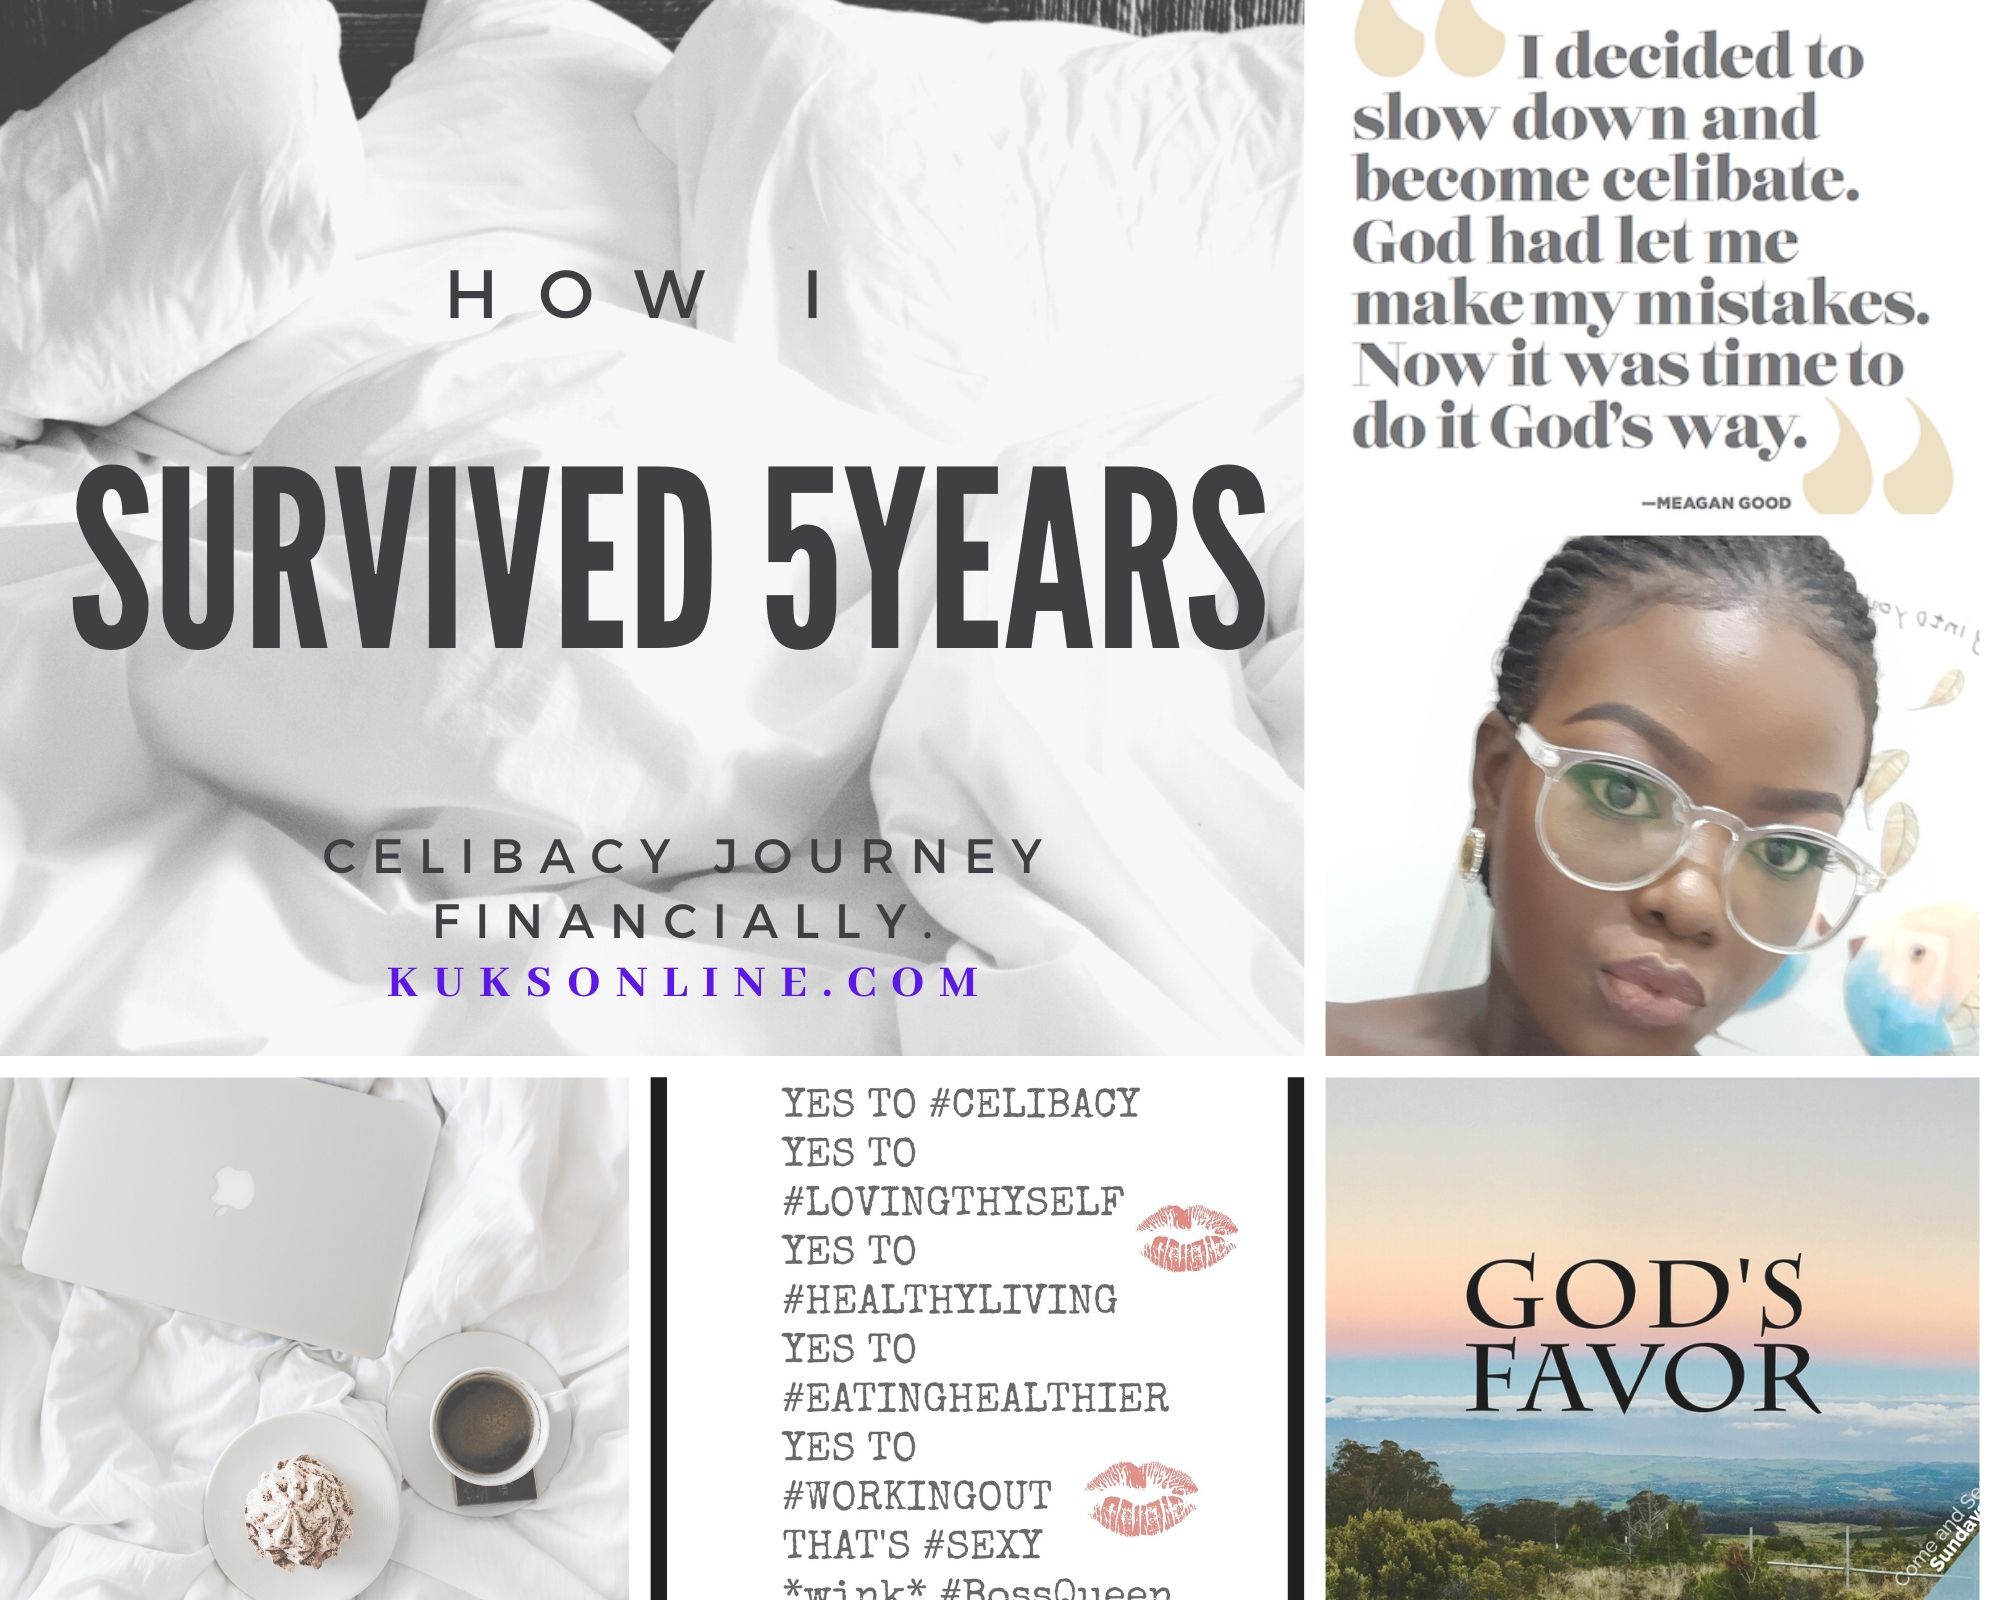 THIS IS MY STORY ON HOW I SURVIVED 5 YEARS OF CELIBACY FINANCIALLY